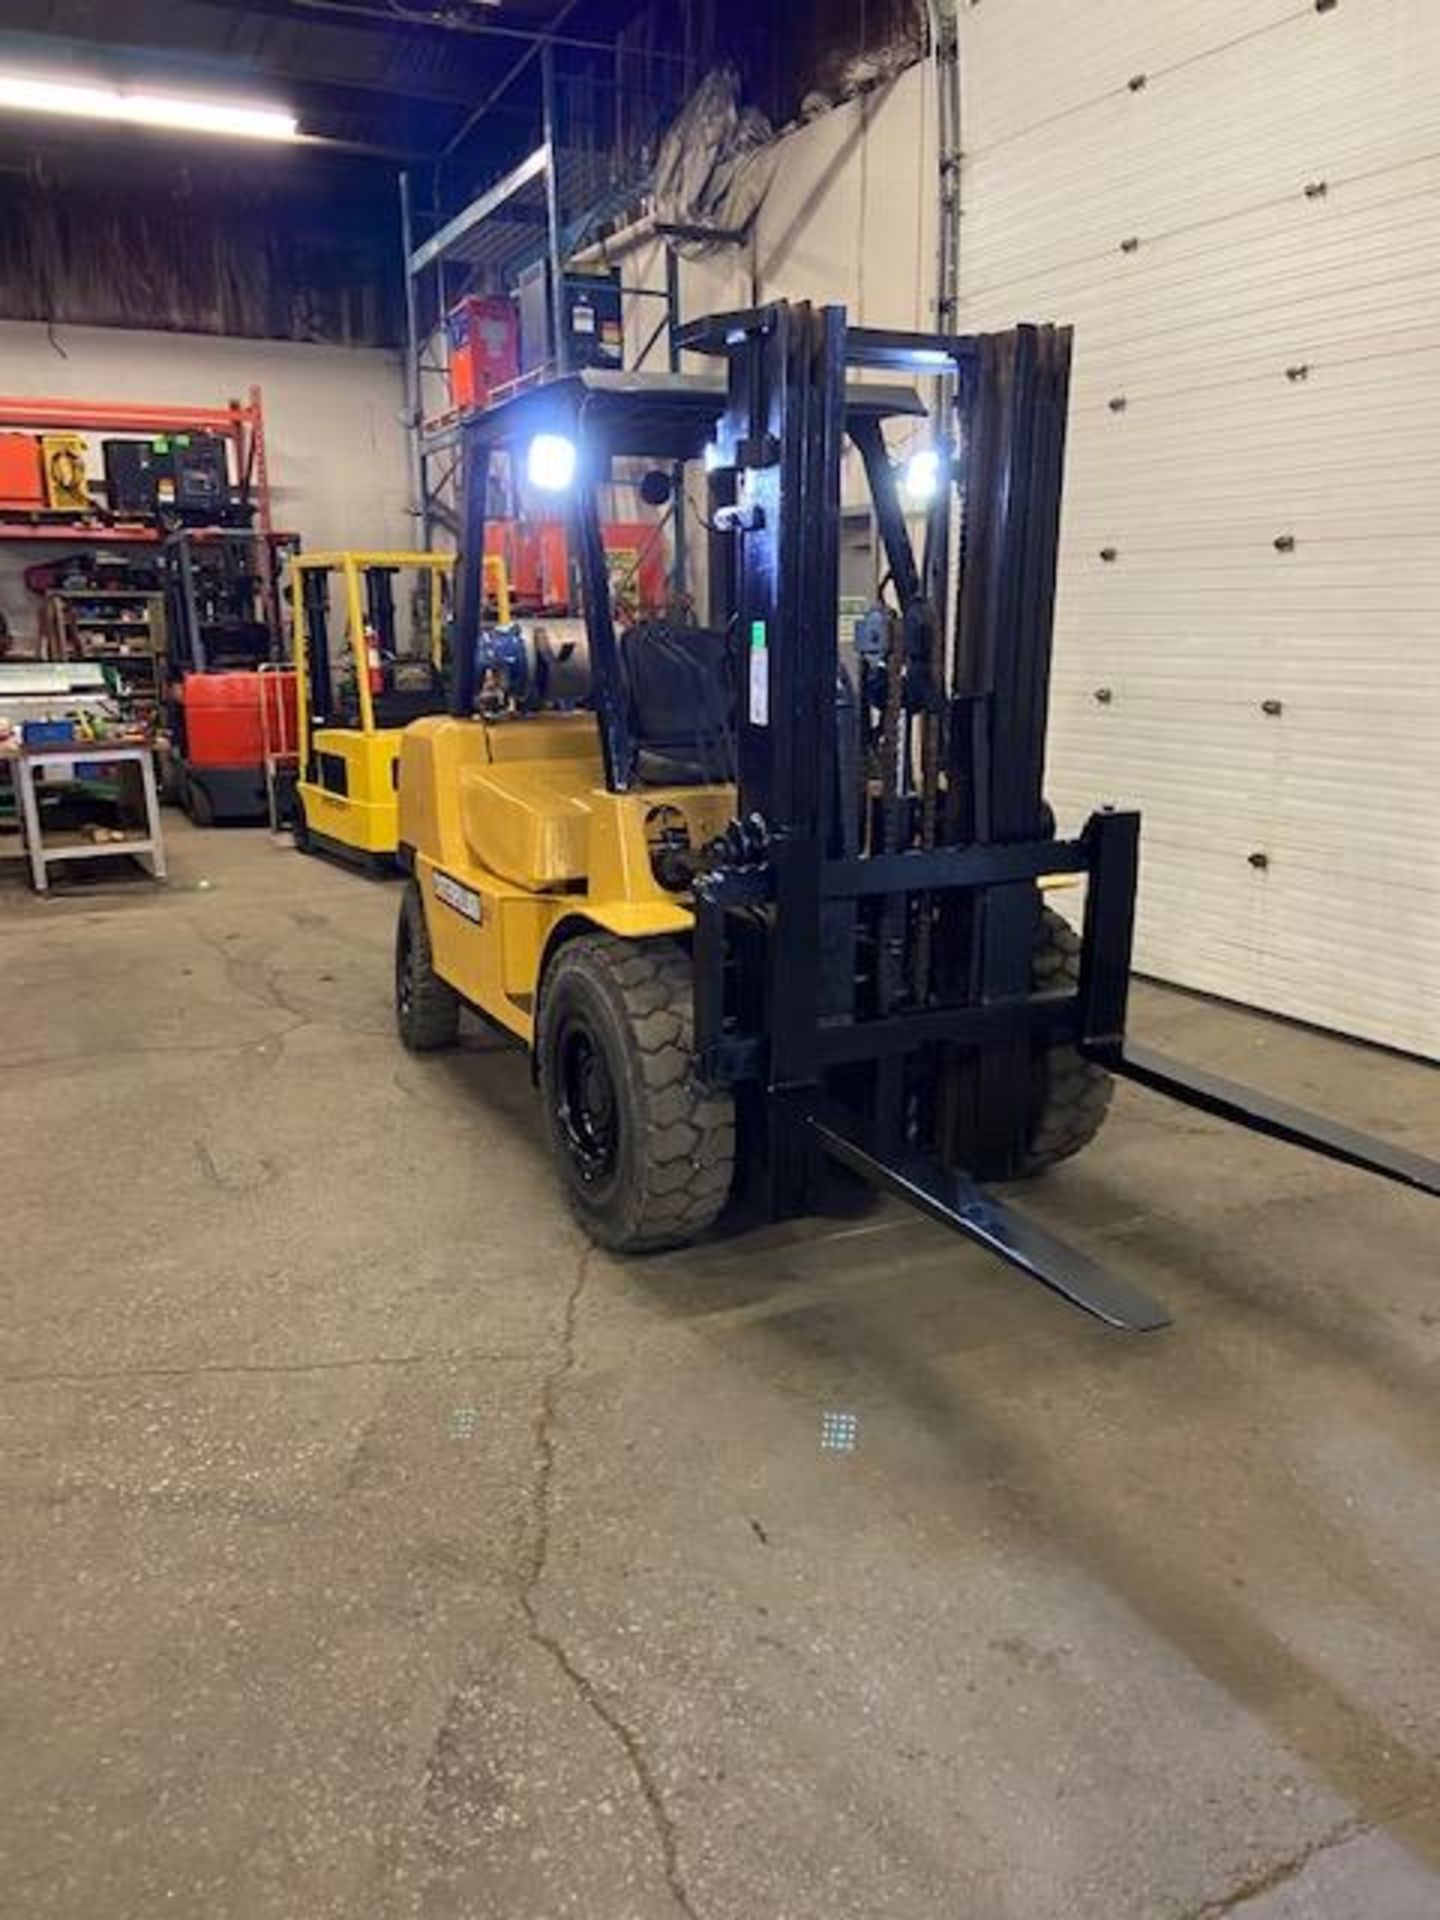 FREE CUSTOMS - Caterpillar 8,000lbs Capacity LPG (propane) OUTDOOR Forklift with 3 stage mast (no - Image 2 of 3